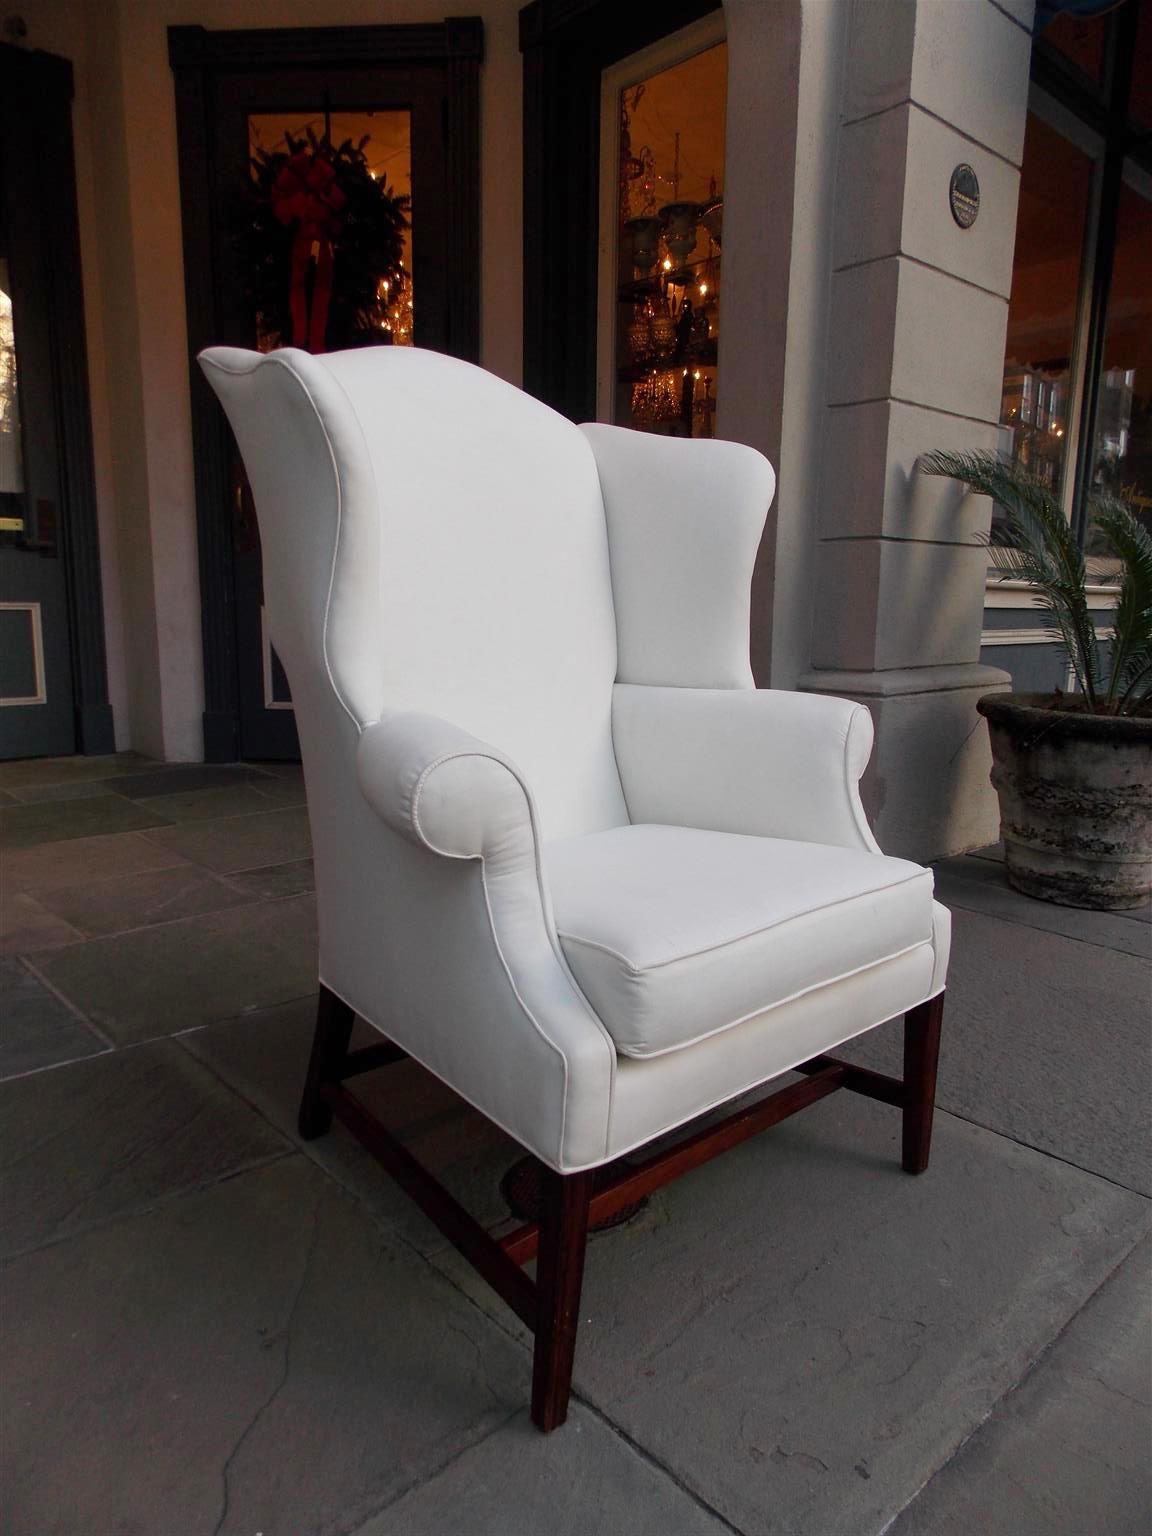 American Hepplewhite mahogany wing back chair with serpentine back, flared wings, flanking scrolled arms, removable seat cushion, and terminating on molded tapered squared legs with the original connecting stretchers. Secondary wood consist of White